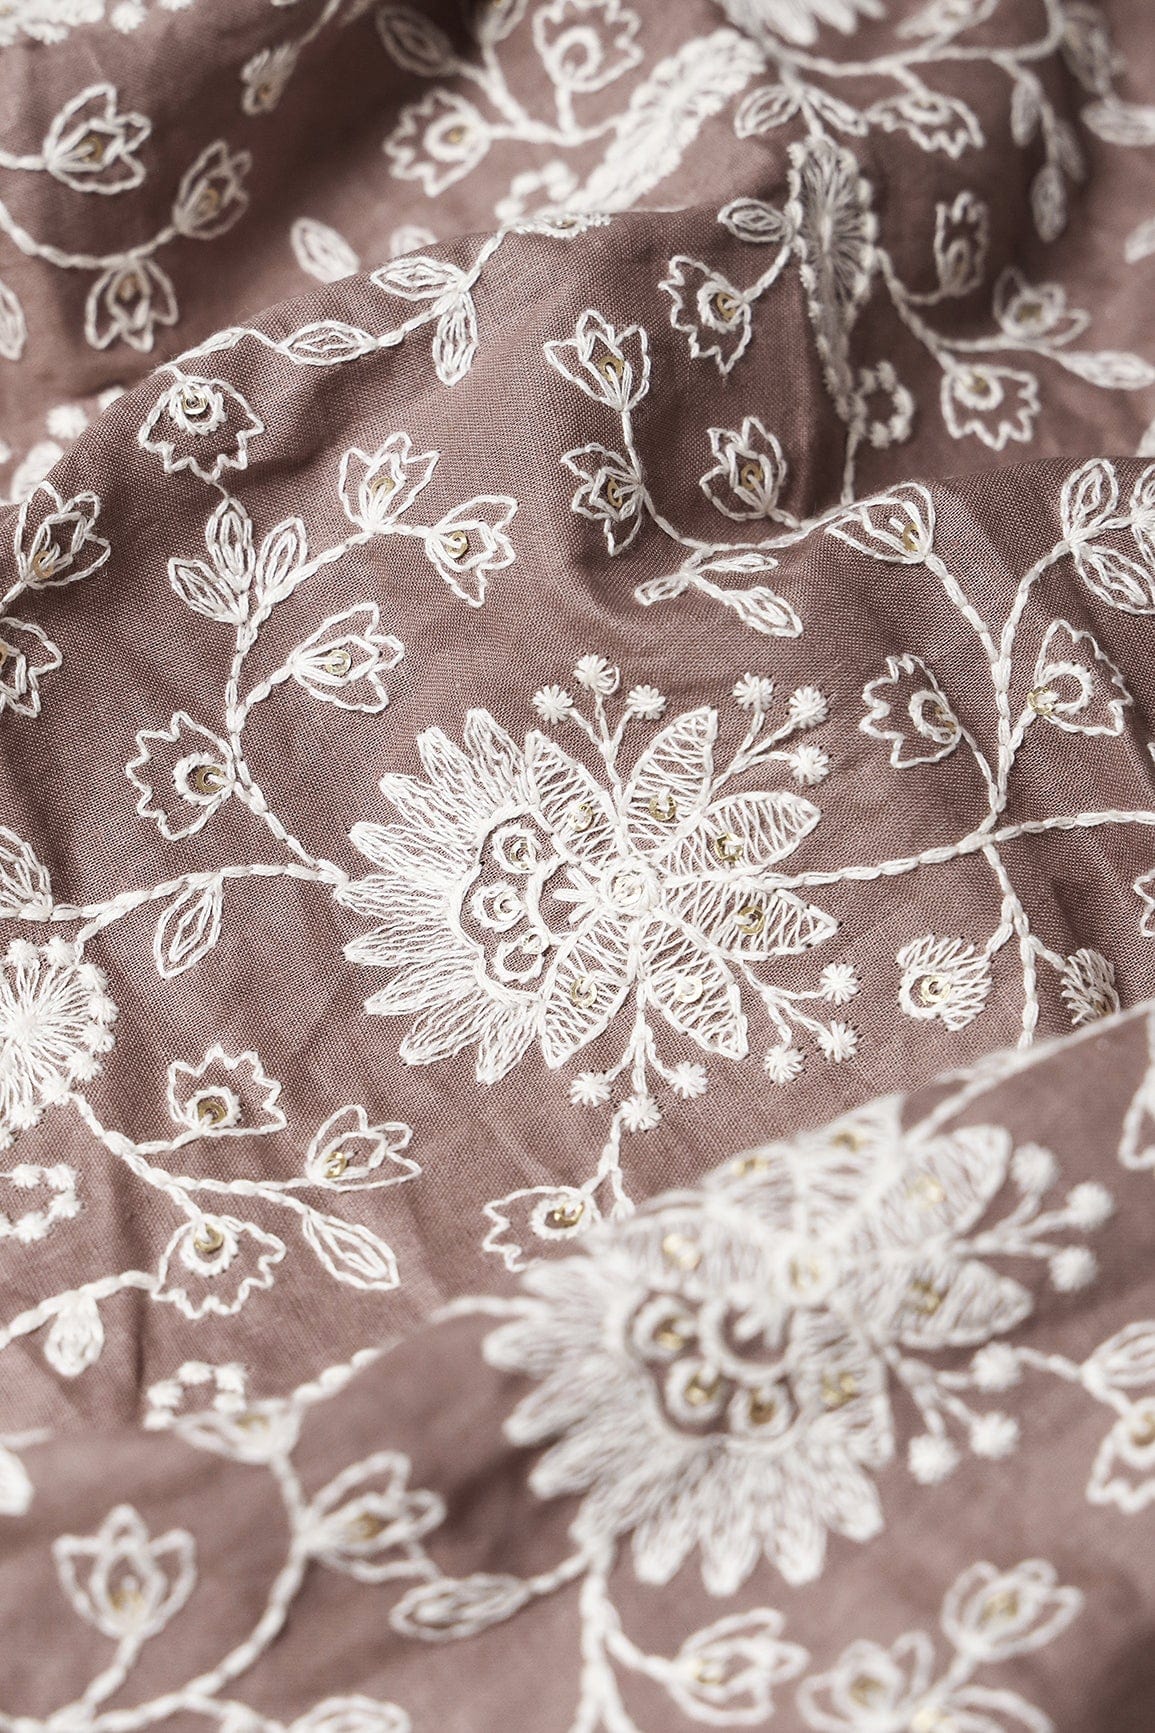 doeraa Embroidery Fabrics Beautiful White Thread With Gold Sequins Lucknowi Floral Embroidery Work On Brown Soft Cotton Fabric